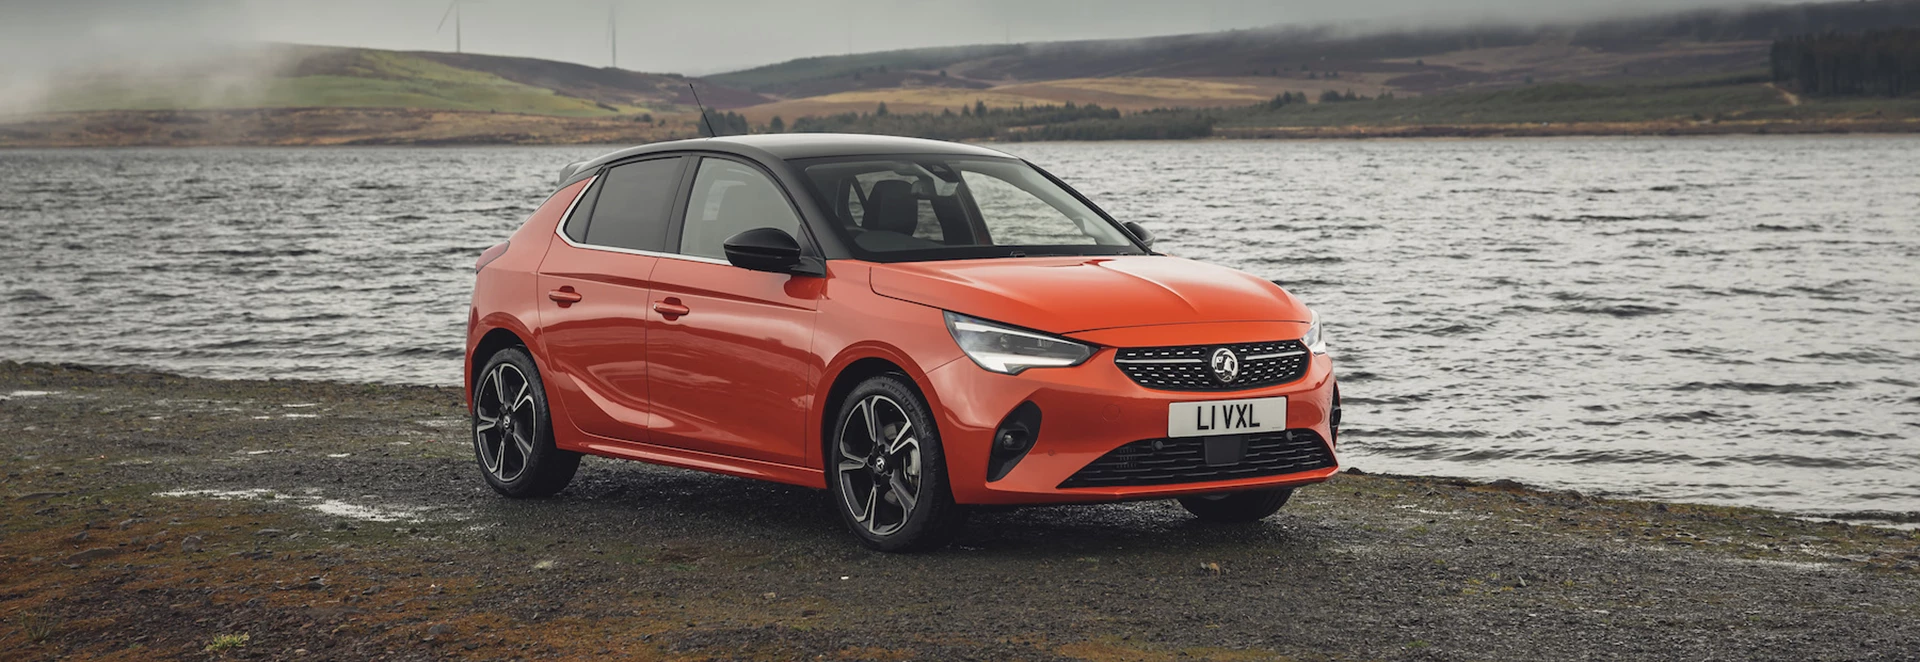 Here are the best-selling cars in June 2020 